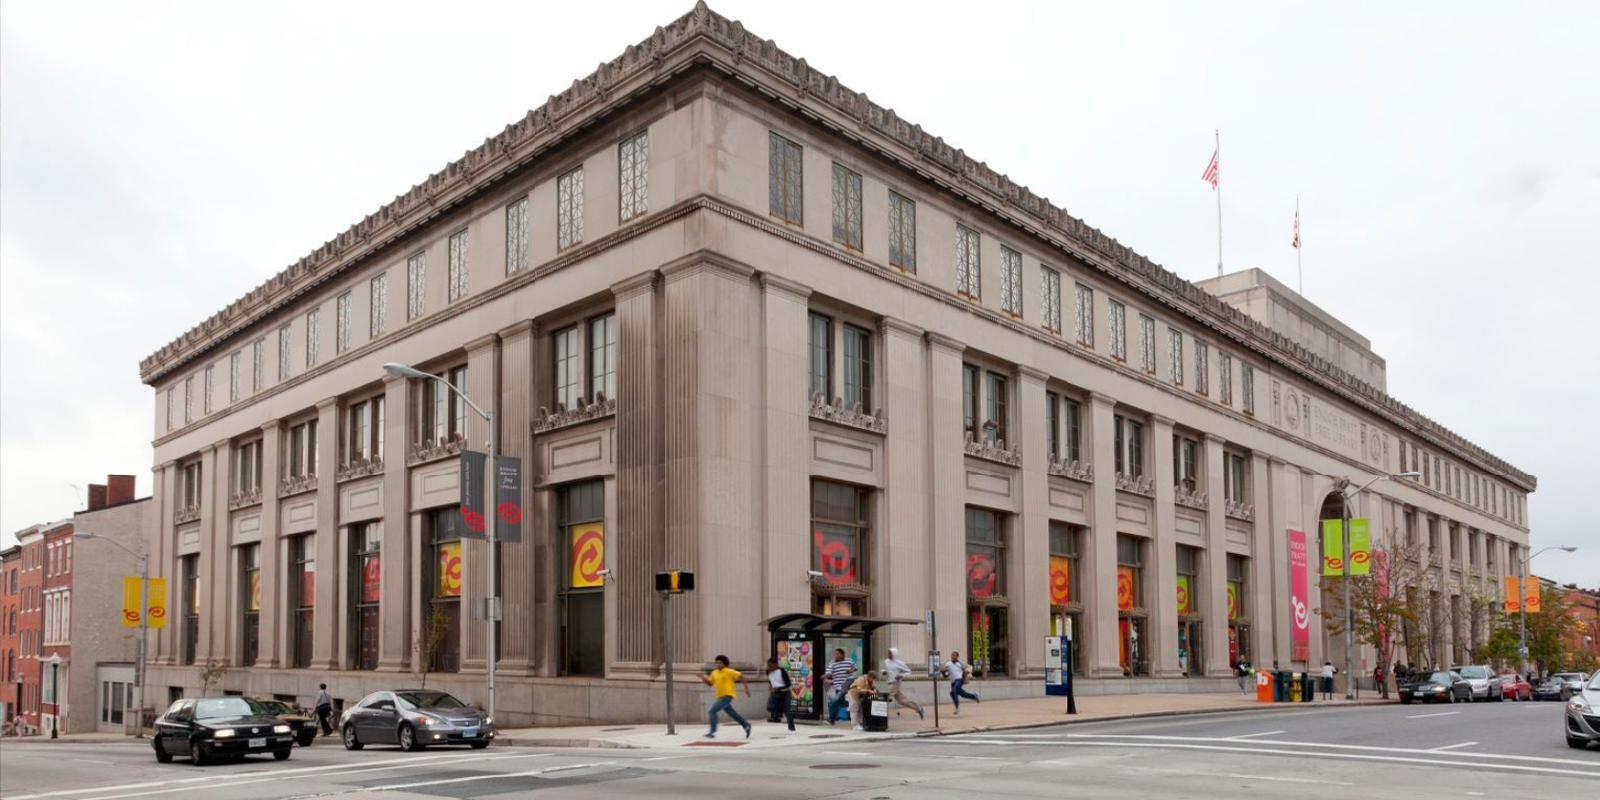 Workers at Baltimore’s Enoch Pratt Free Library seek union recognition